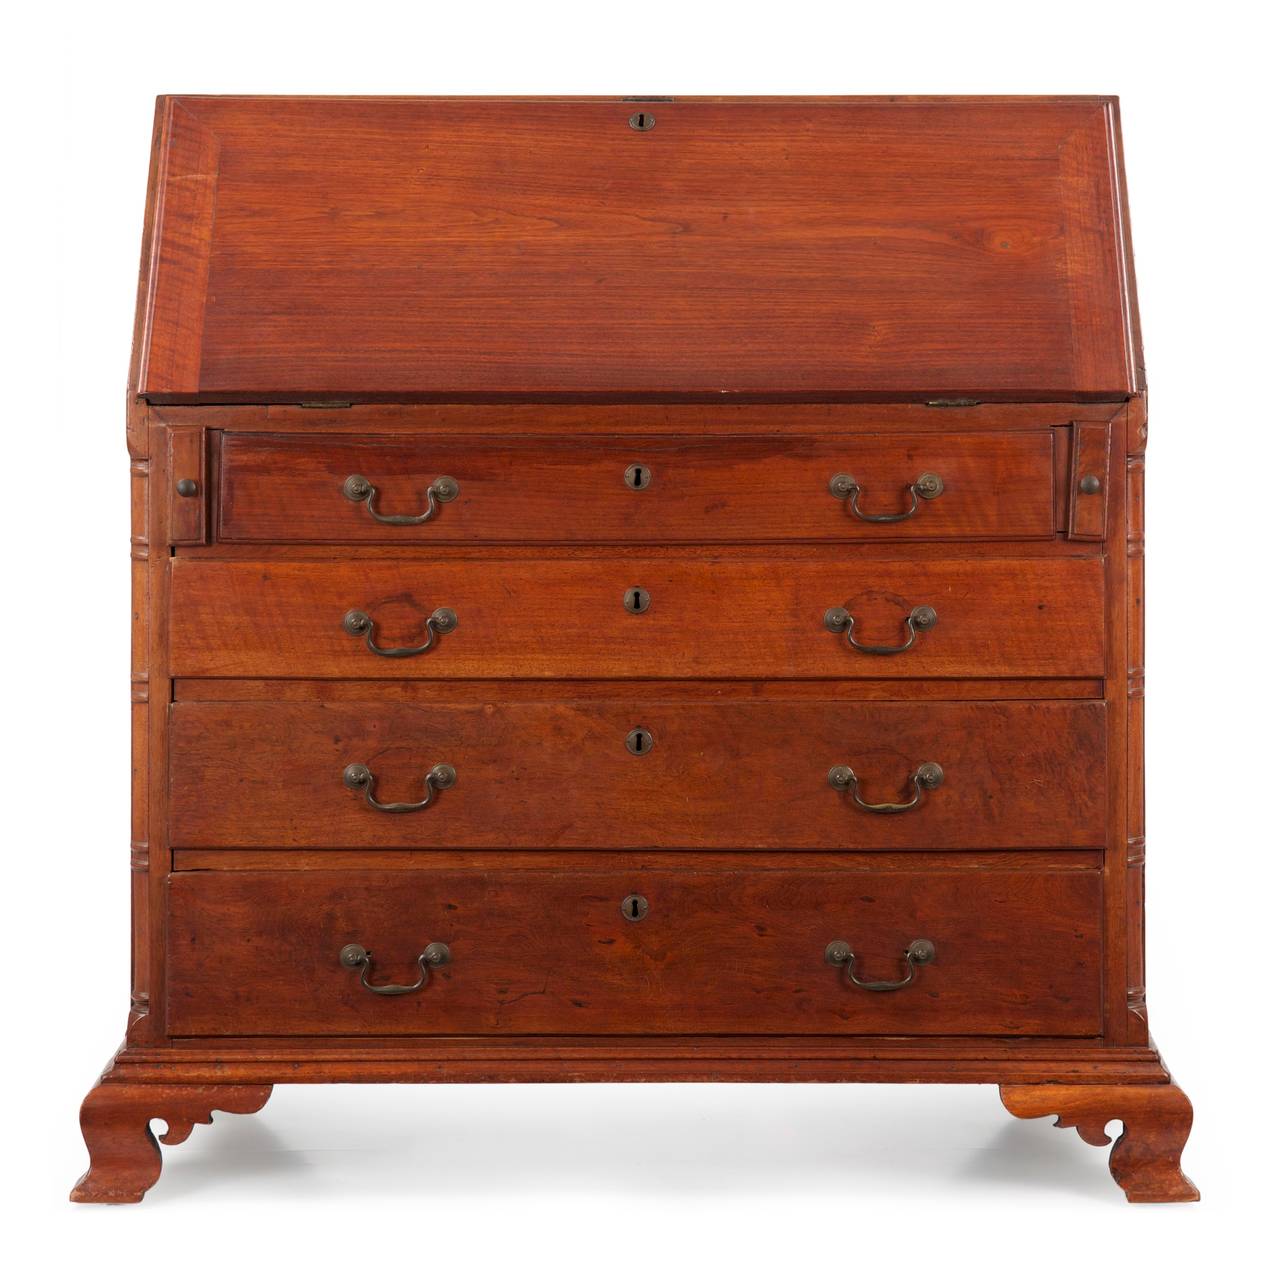 AMERICAN CHIPPENDALE WALNUT SLANT FRONT DESK, PENNSYLVANIA
Probably Chester County, signed illegibly four times and dated 1807

This fine example of Eastern Pennsylvania craftsmanship, almost certainly originating in Chester County, has a